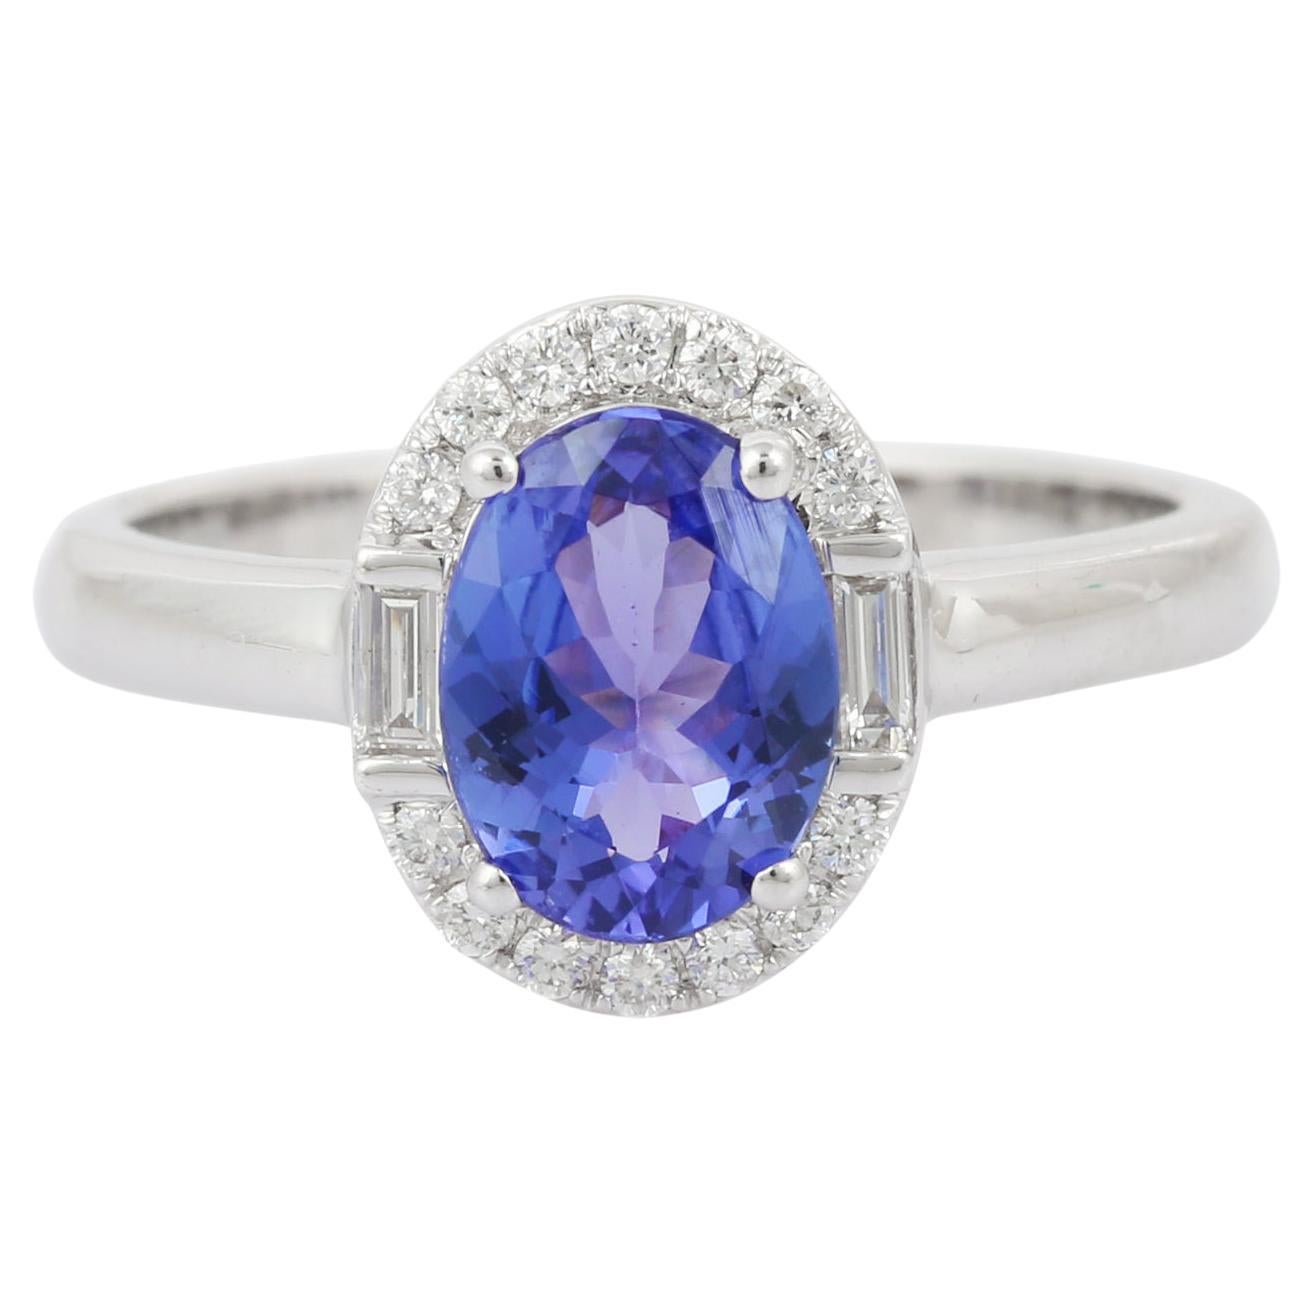 Oval Shape Tanzanite and Diamond Wedding Ring in 18k Solid White Gold